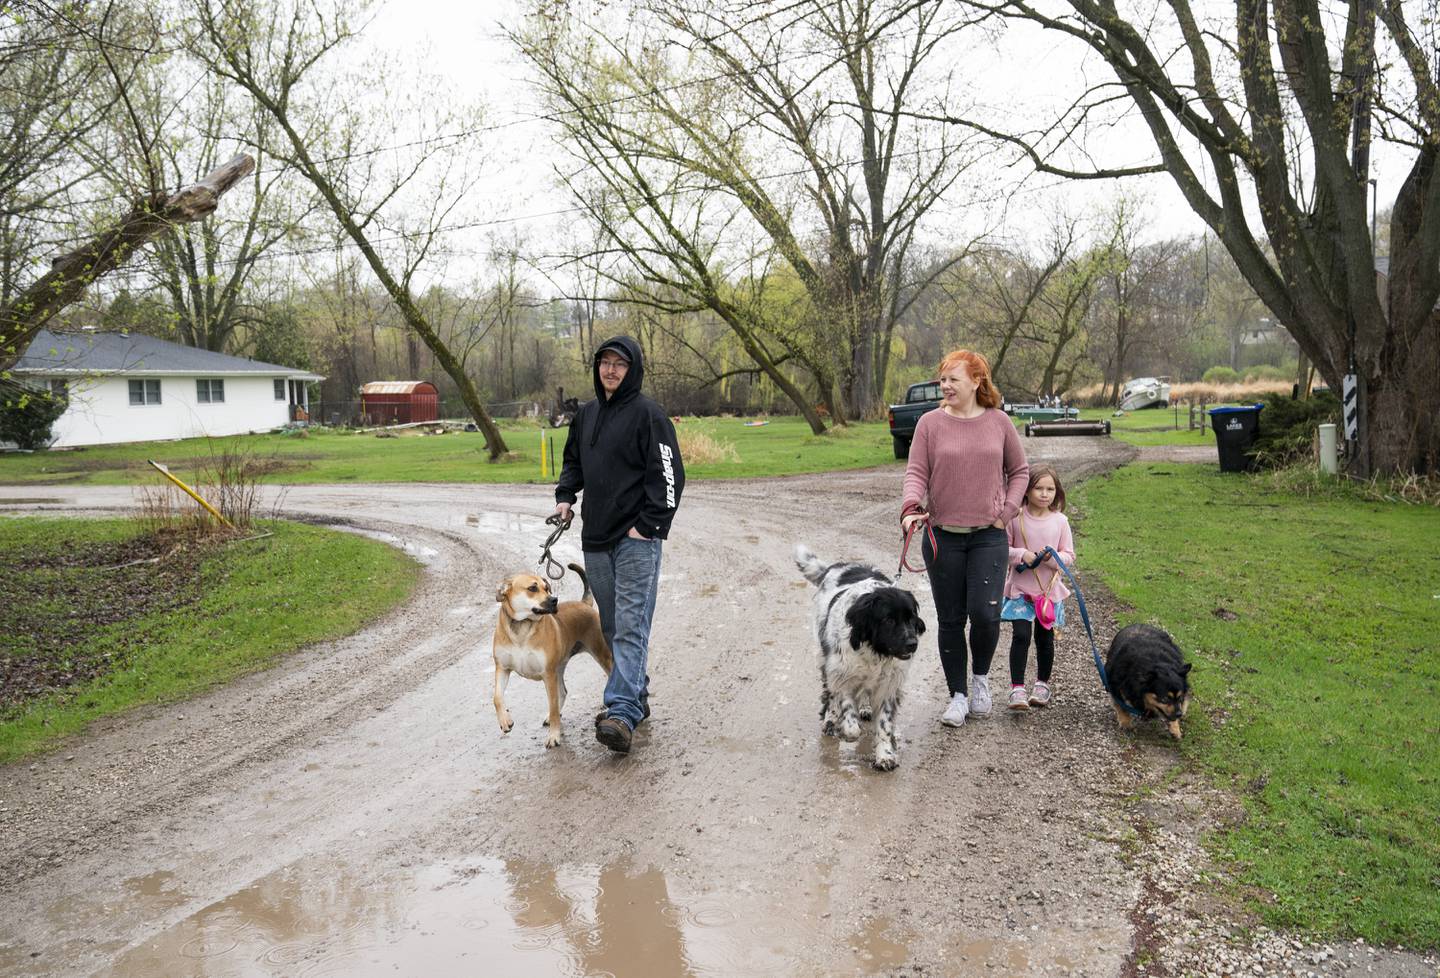 "We know we are going to flood once a year, we just don't know the severity," says Melissa Sanderson as she walks with her husband, Jamie, and daughter, Lilly, 5, near the Nippersink Creek on Saturday, April 10, 2021, in the Dubell Park neighborhood of Spring Grove. The neighborhood is prone to heavy flooding from the creek.